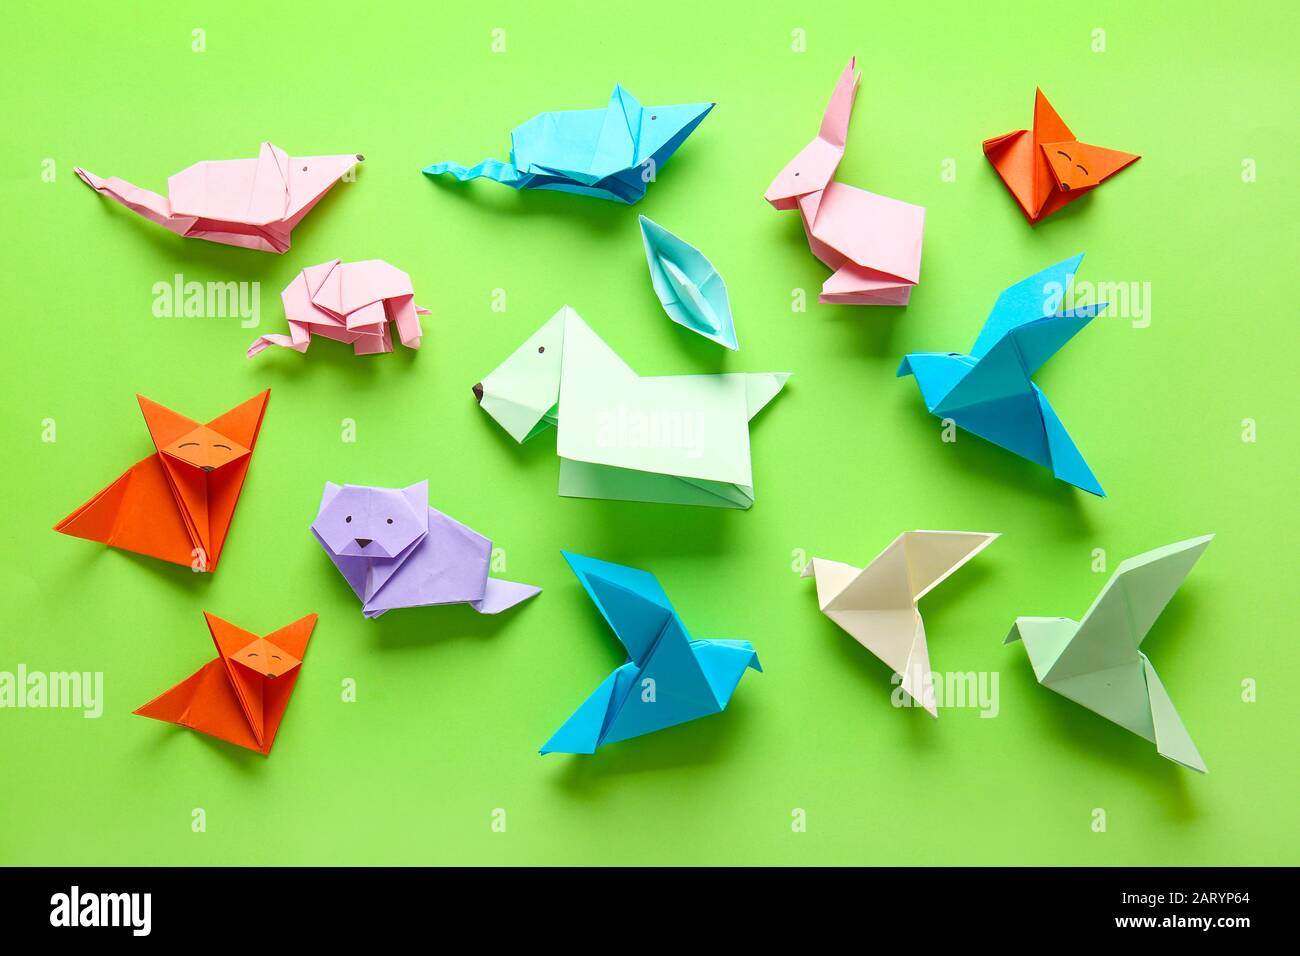 Origami Figures High Resolution Stock Photography and Images - Alamy